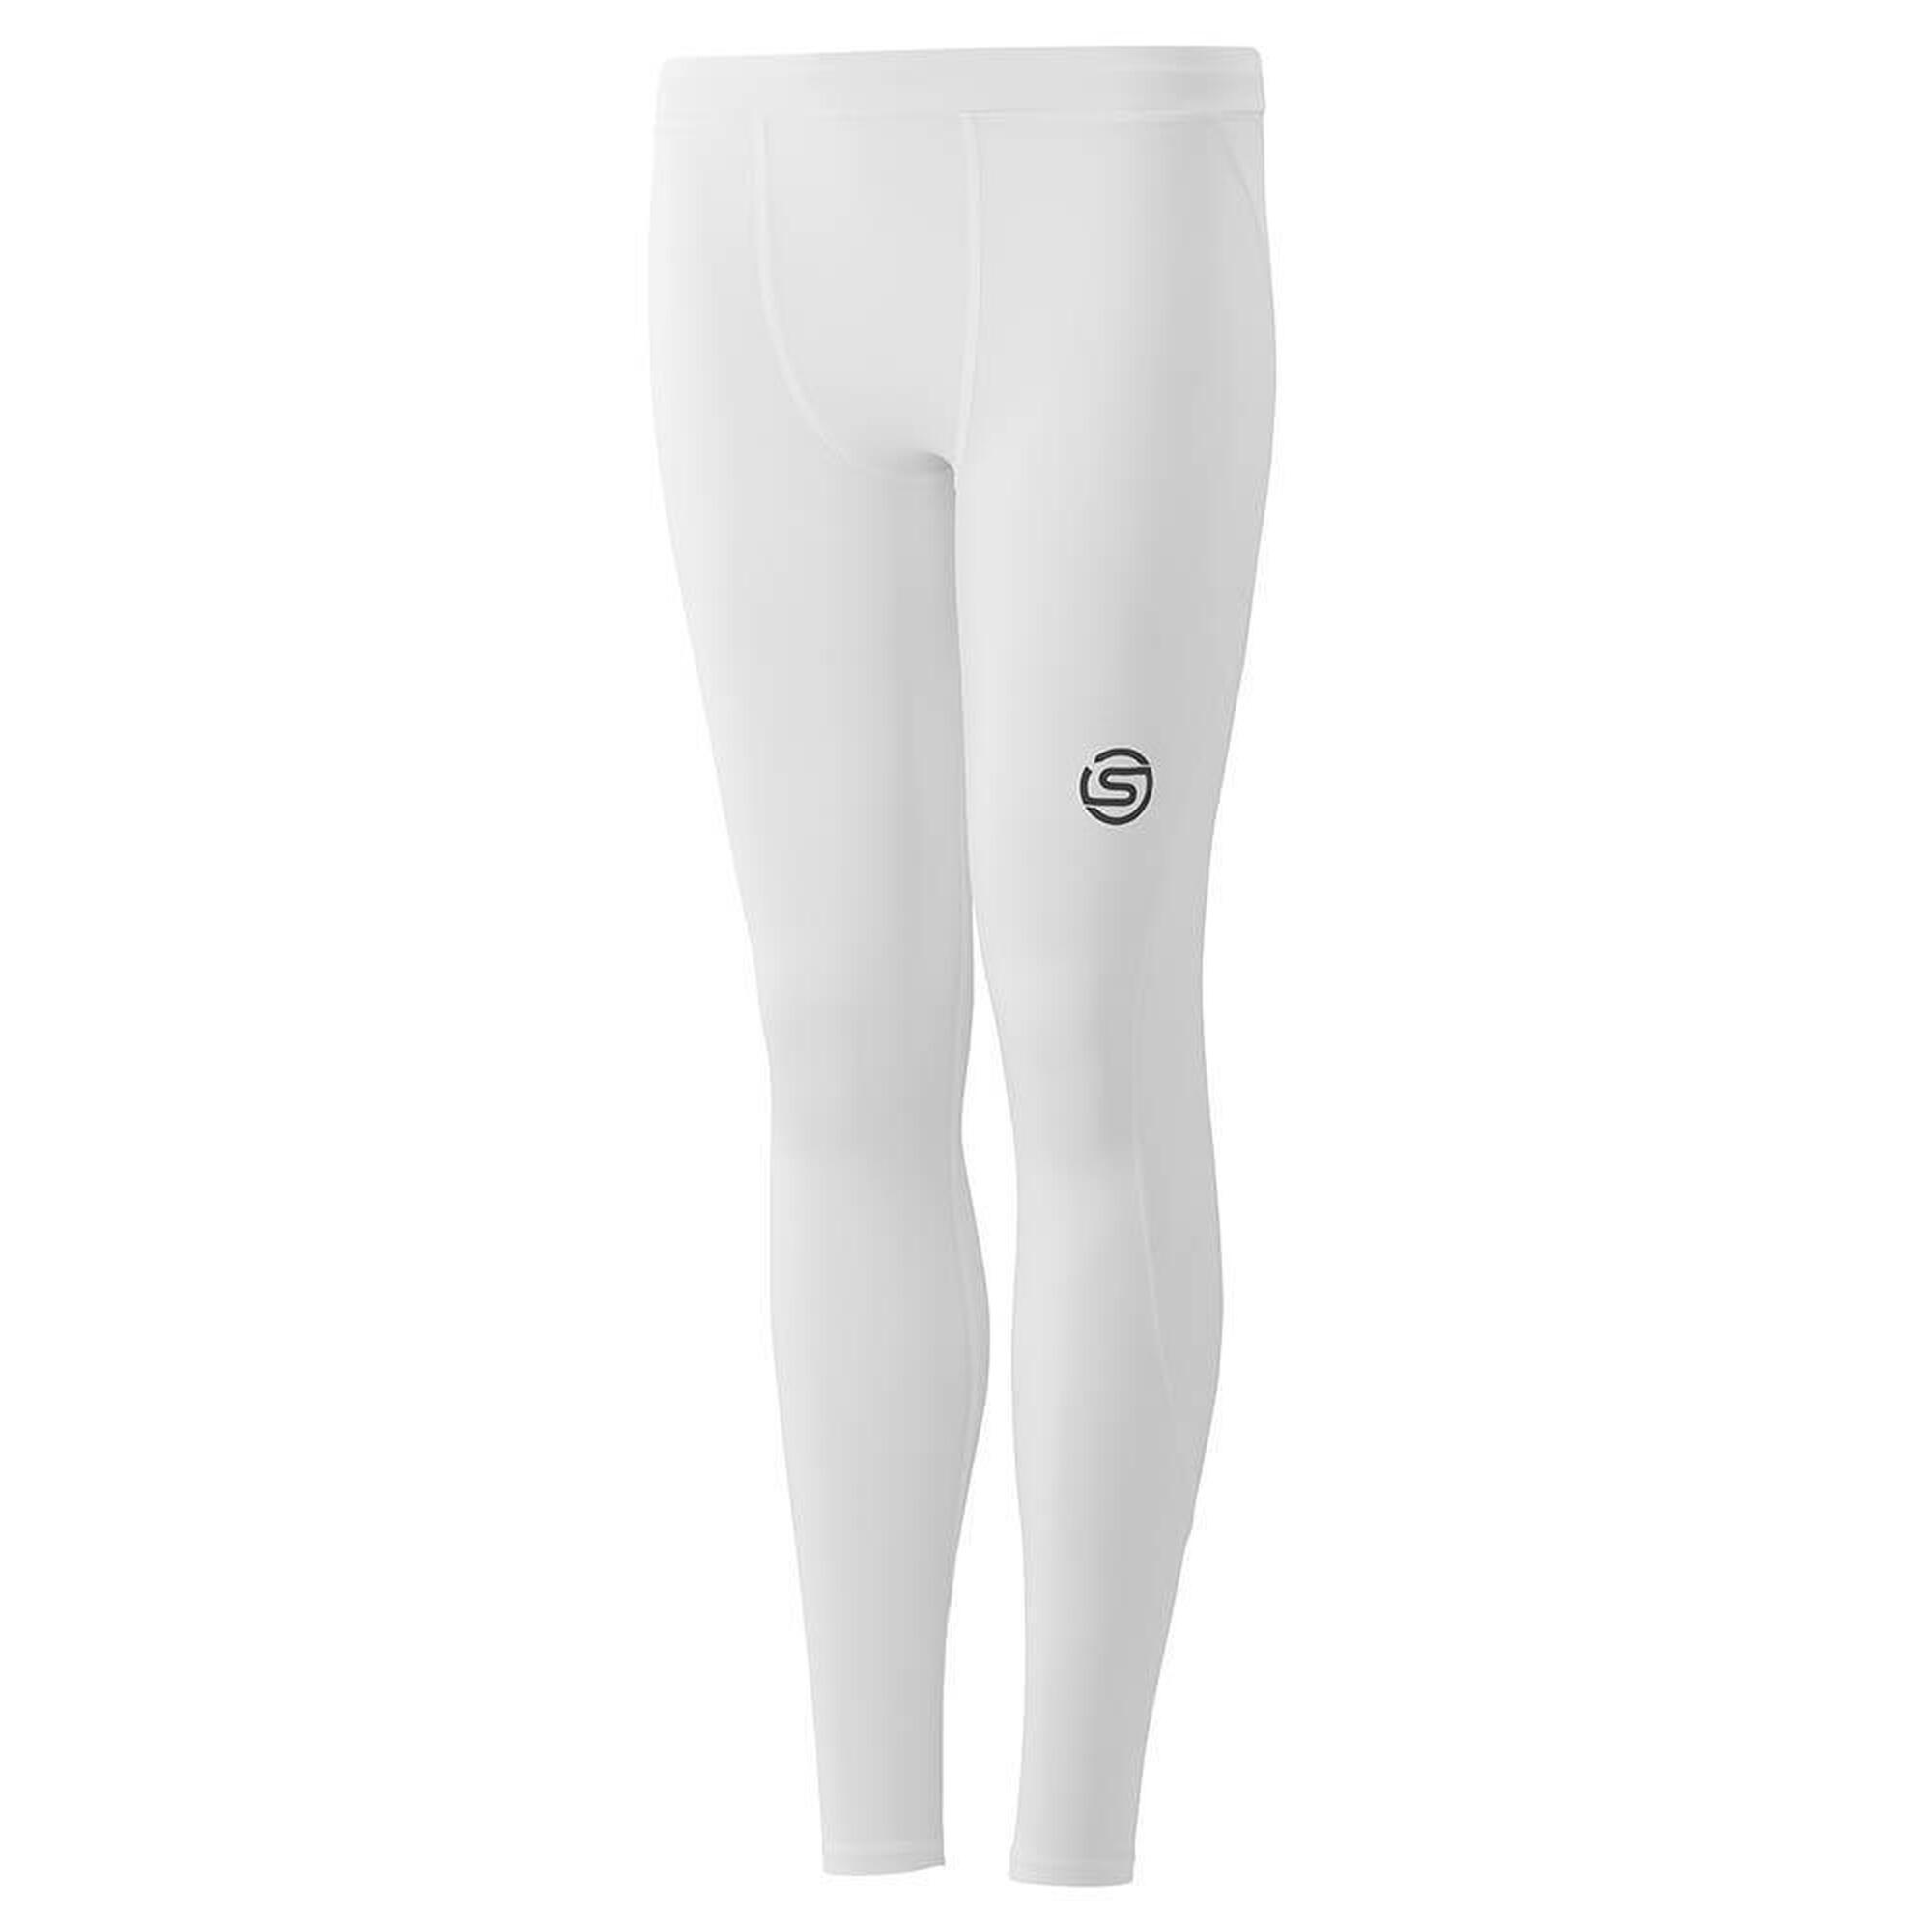 SKINS SKINS Series-1 Youth Tight - White - Size S